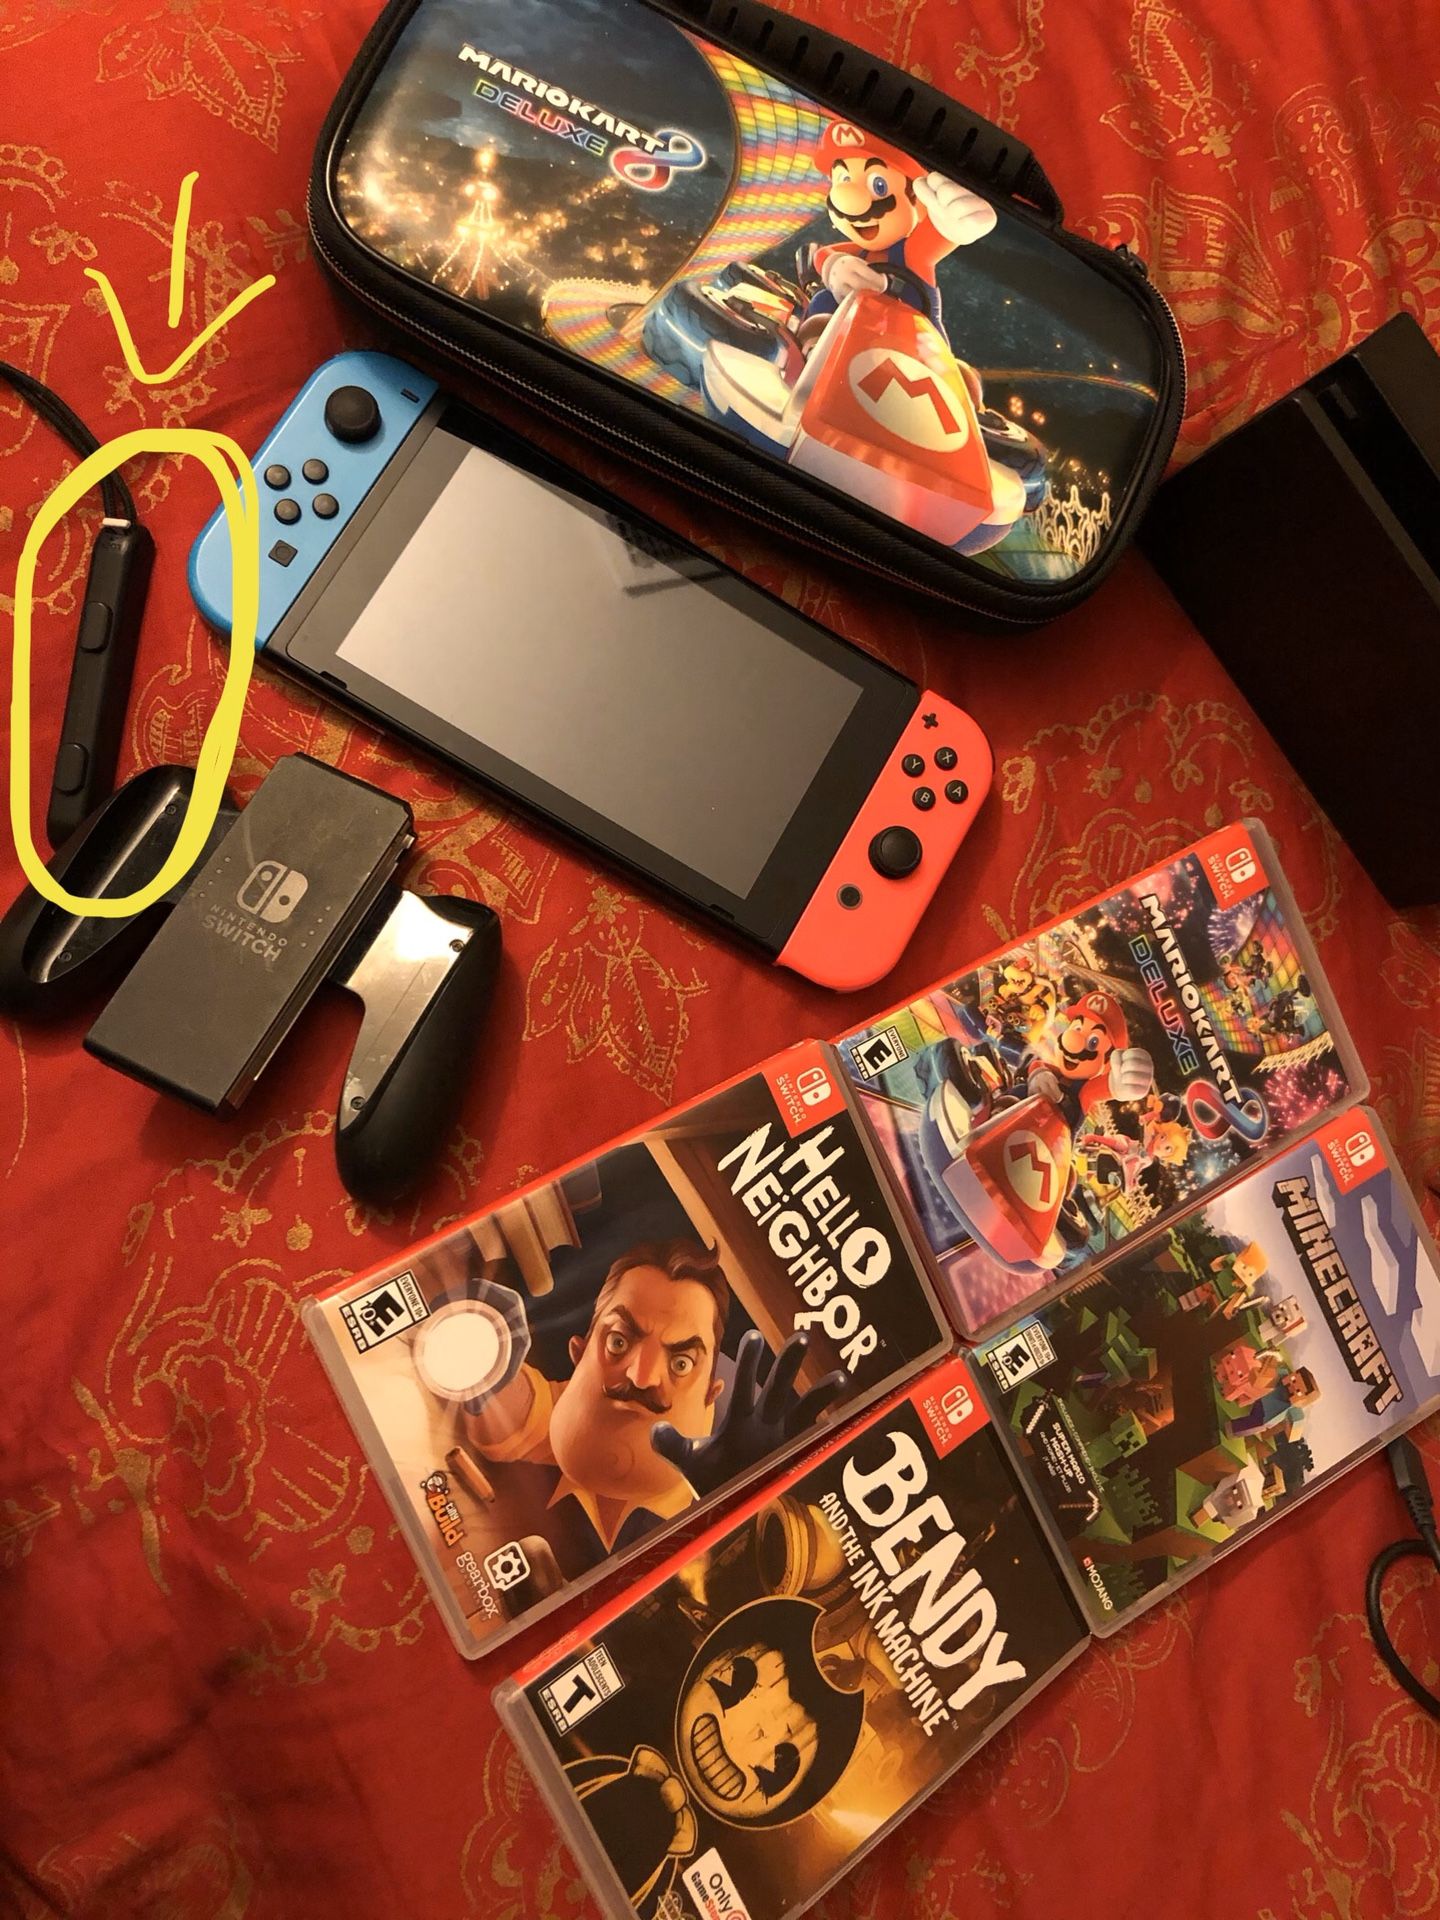 Nintendo switch with games